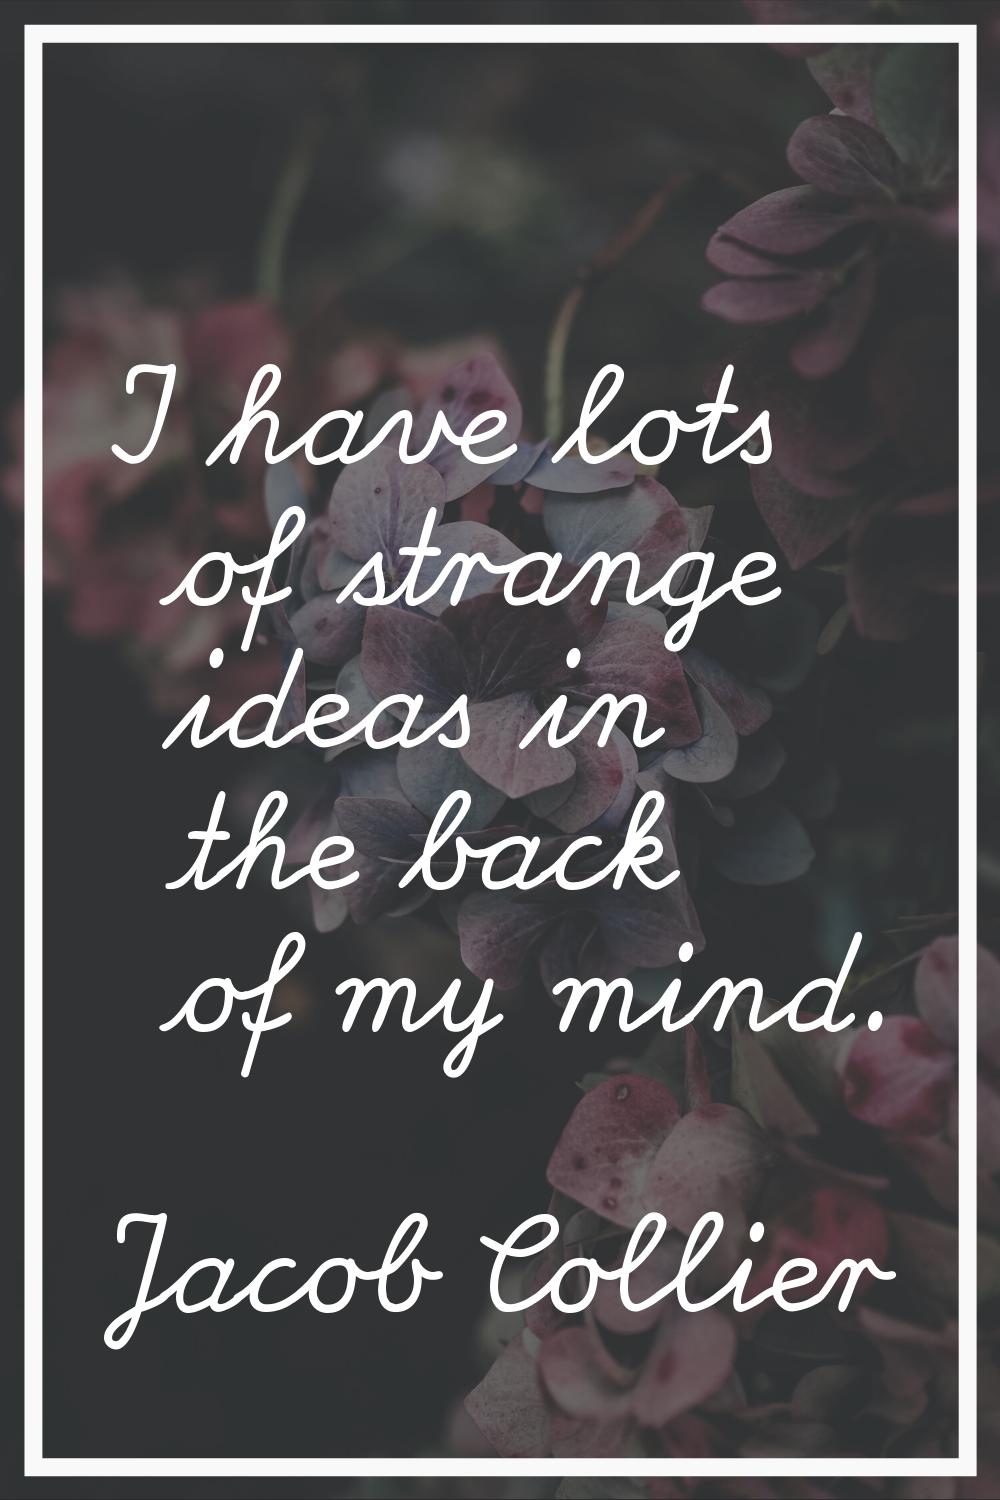 I have lots of strange ideas in the back of my mind.